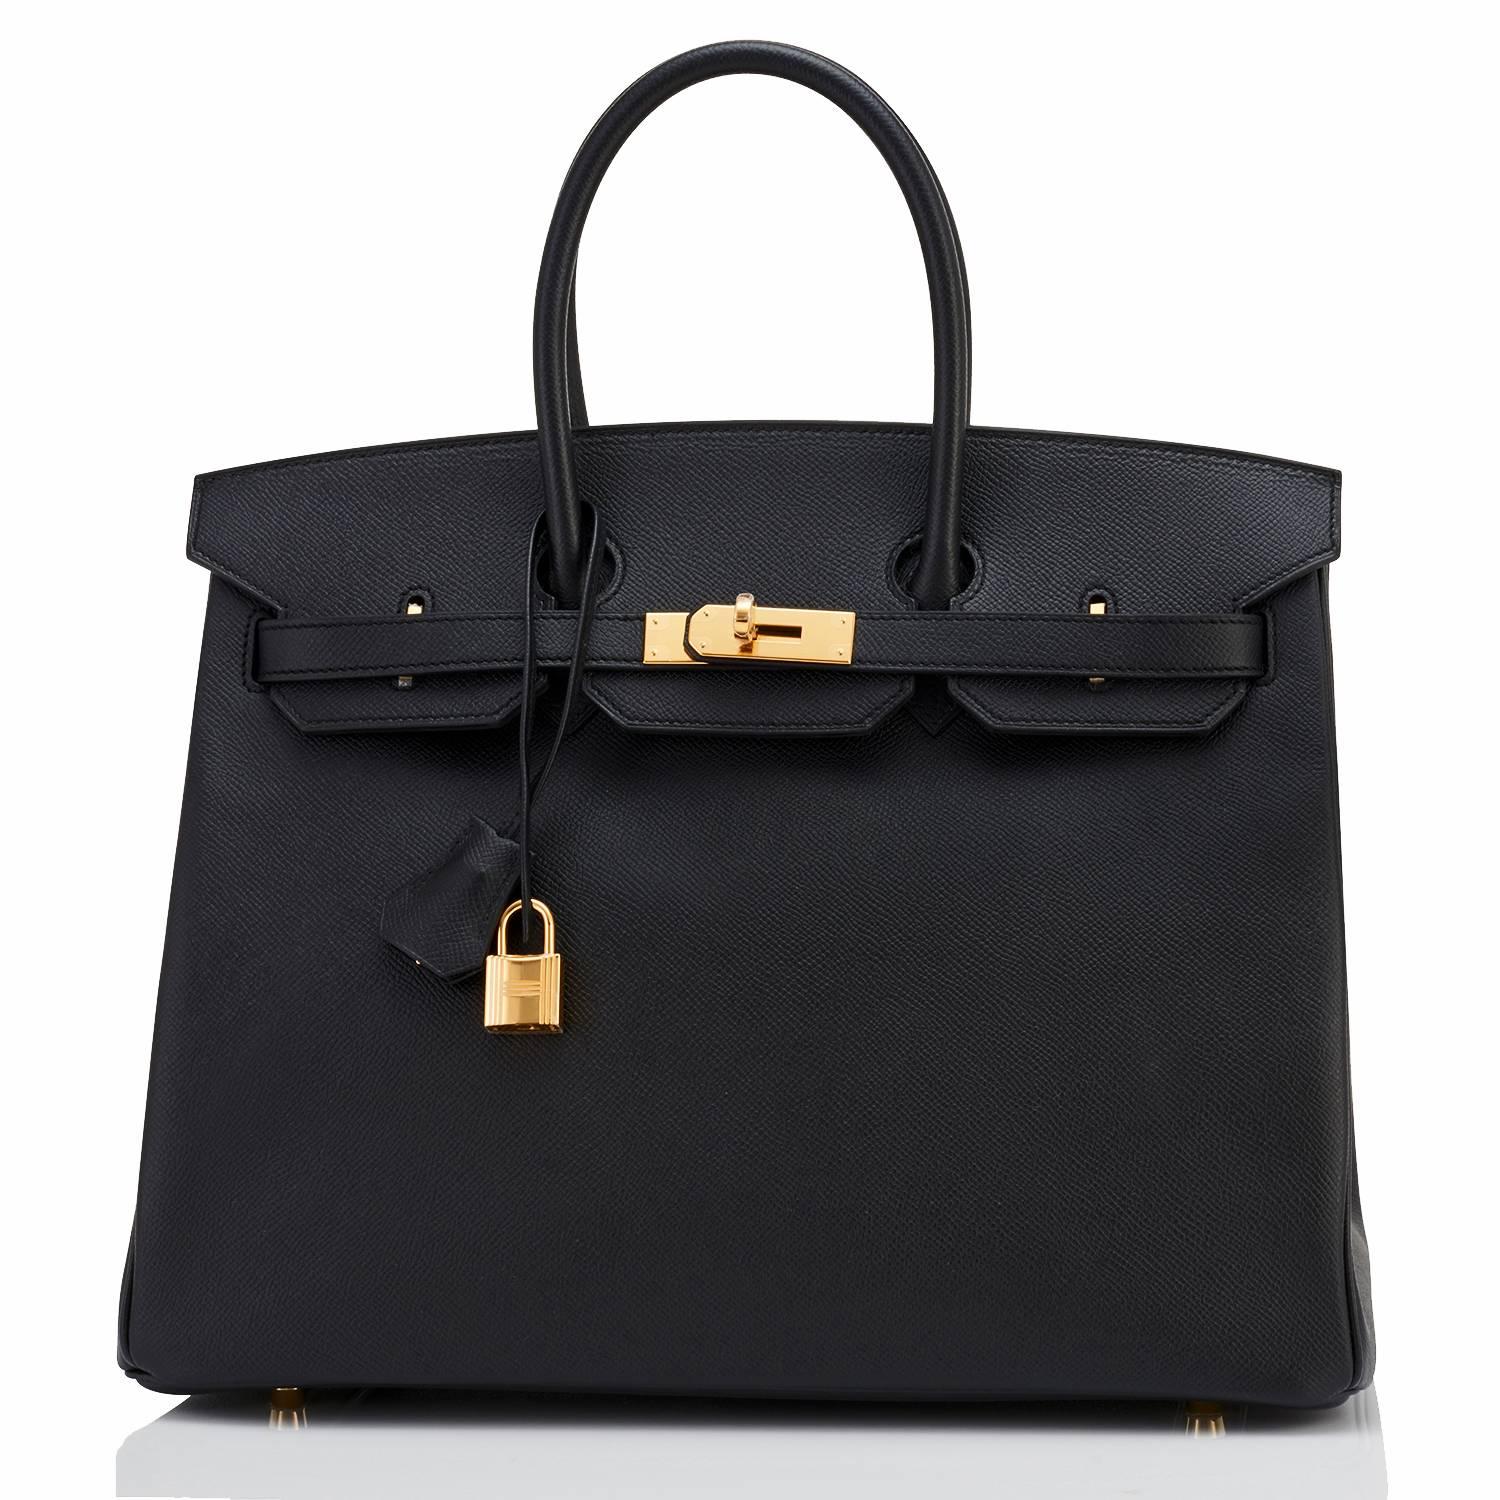 Hermes Black 35cm Birkin Gold Hardware Epsom Bag Power Birkin
Brand new in box. Store Fresh.  Pristine condition (with plastic on hardware).
Just purchased from Hermes store; bag bears new 2018 interior C stamp.
Perfect gift! Comes with keys, lock,